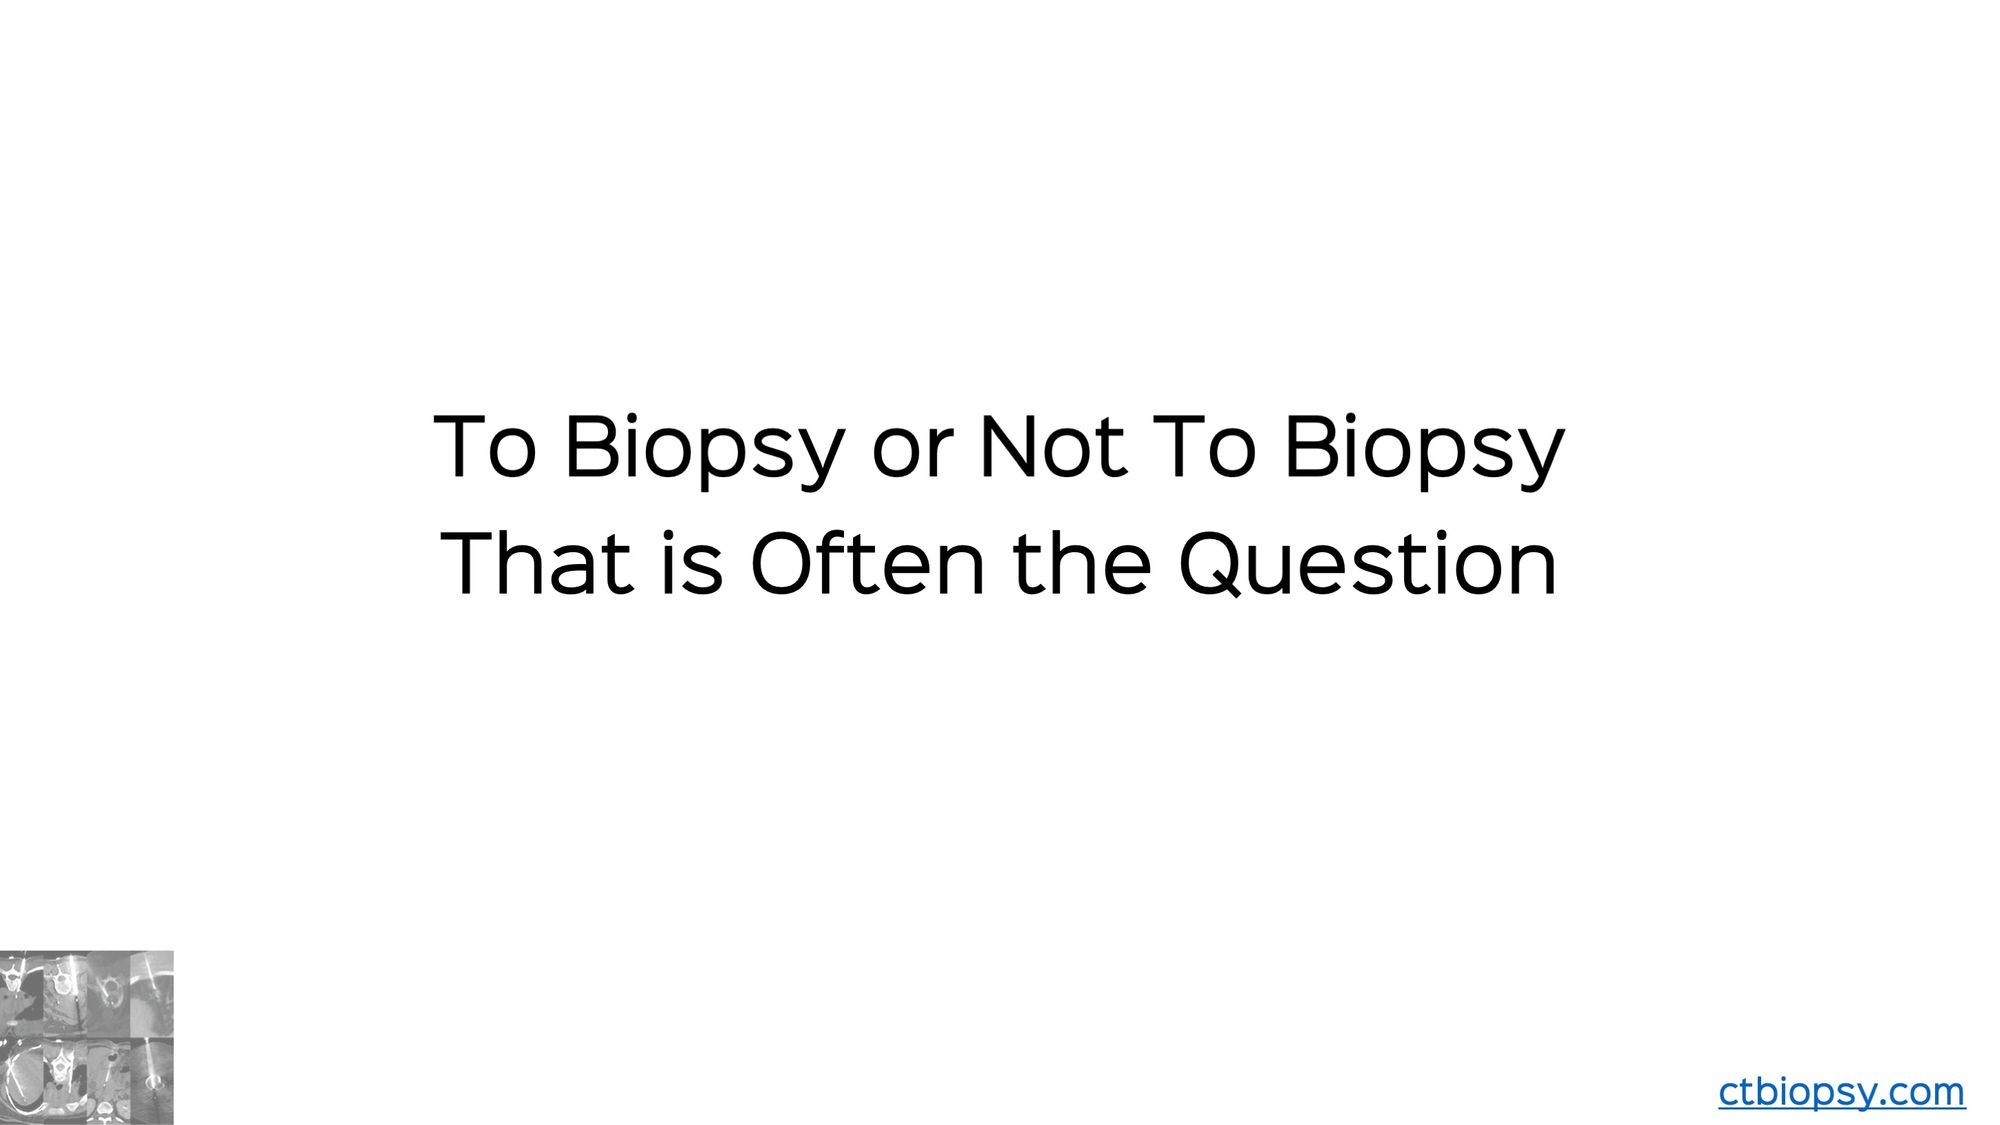 Case 29: To Biopsy or Not to Biopsy...That is Often the Question